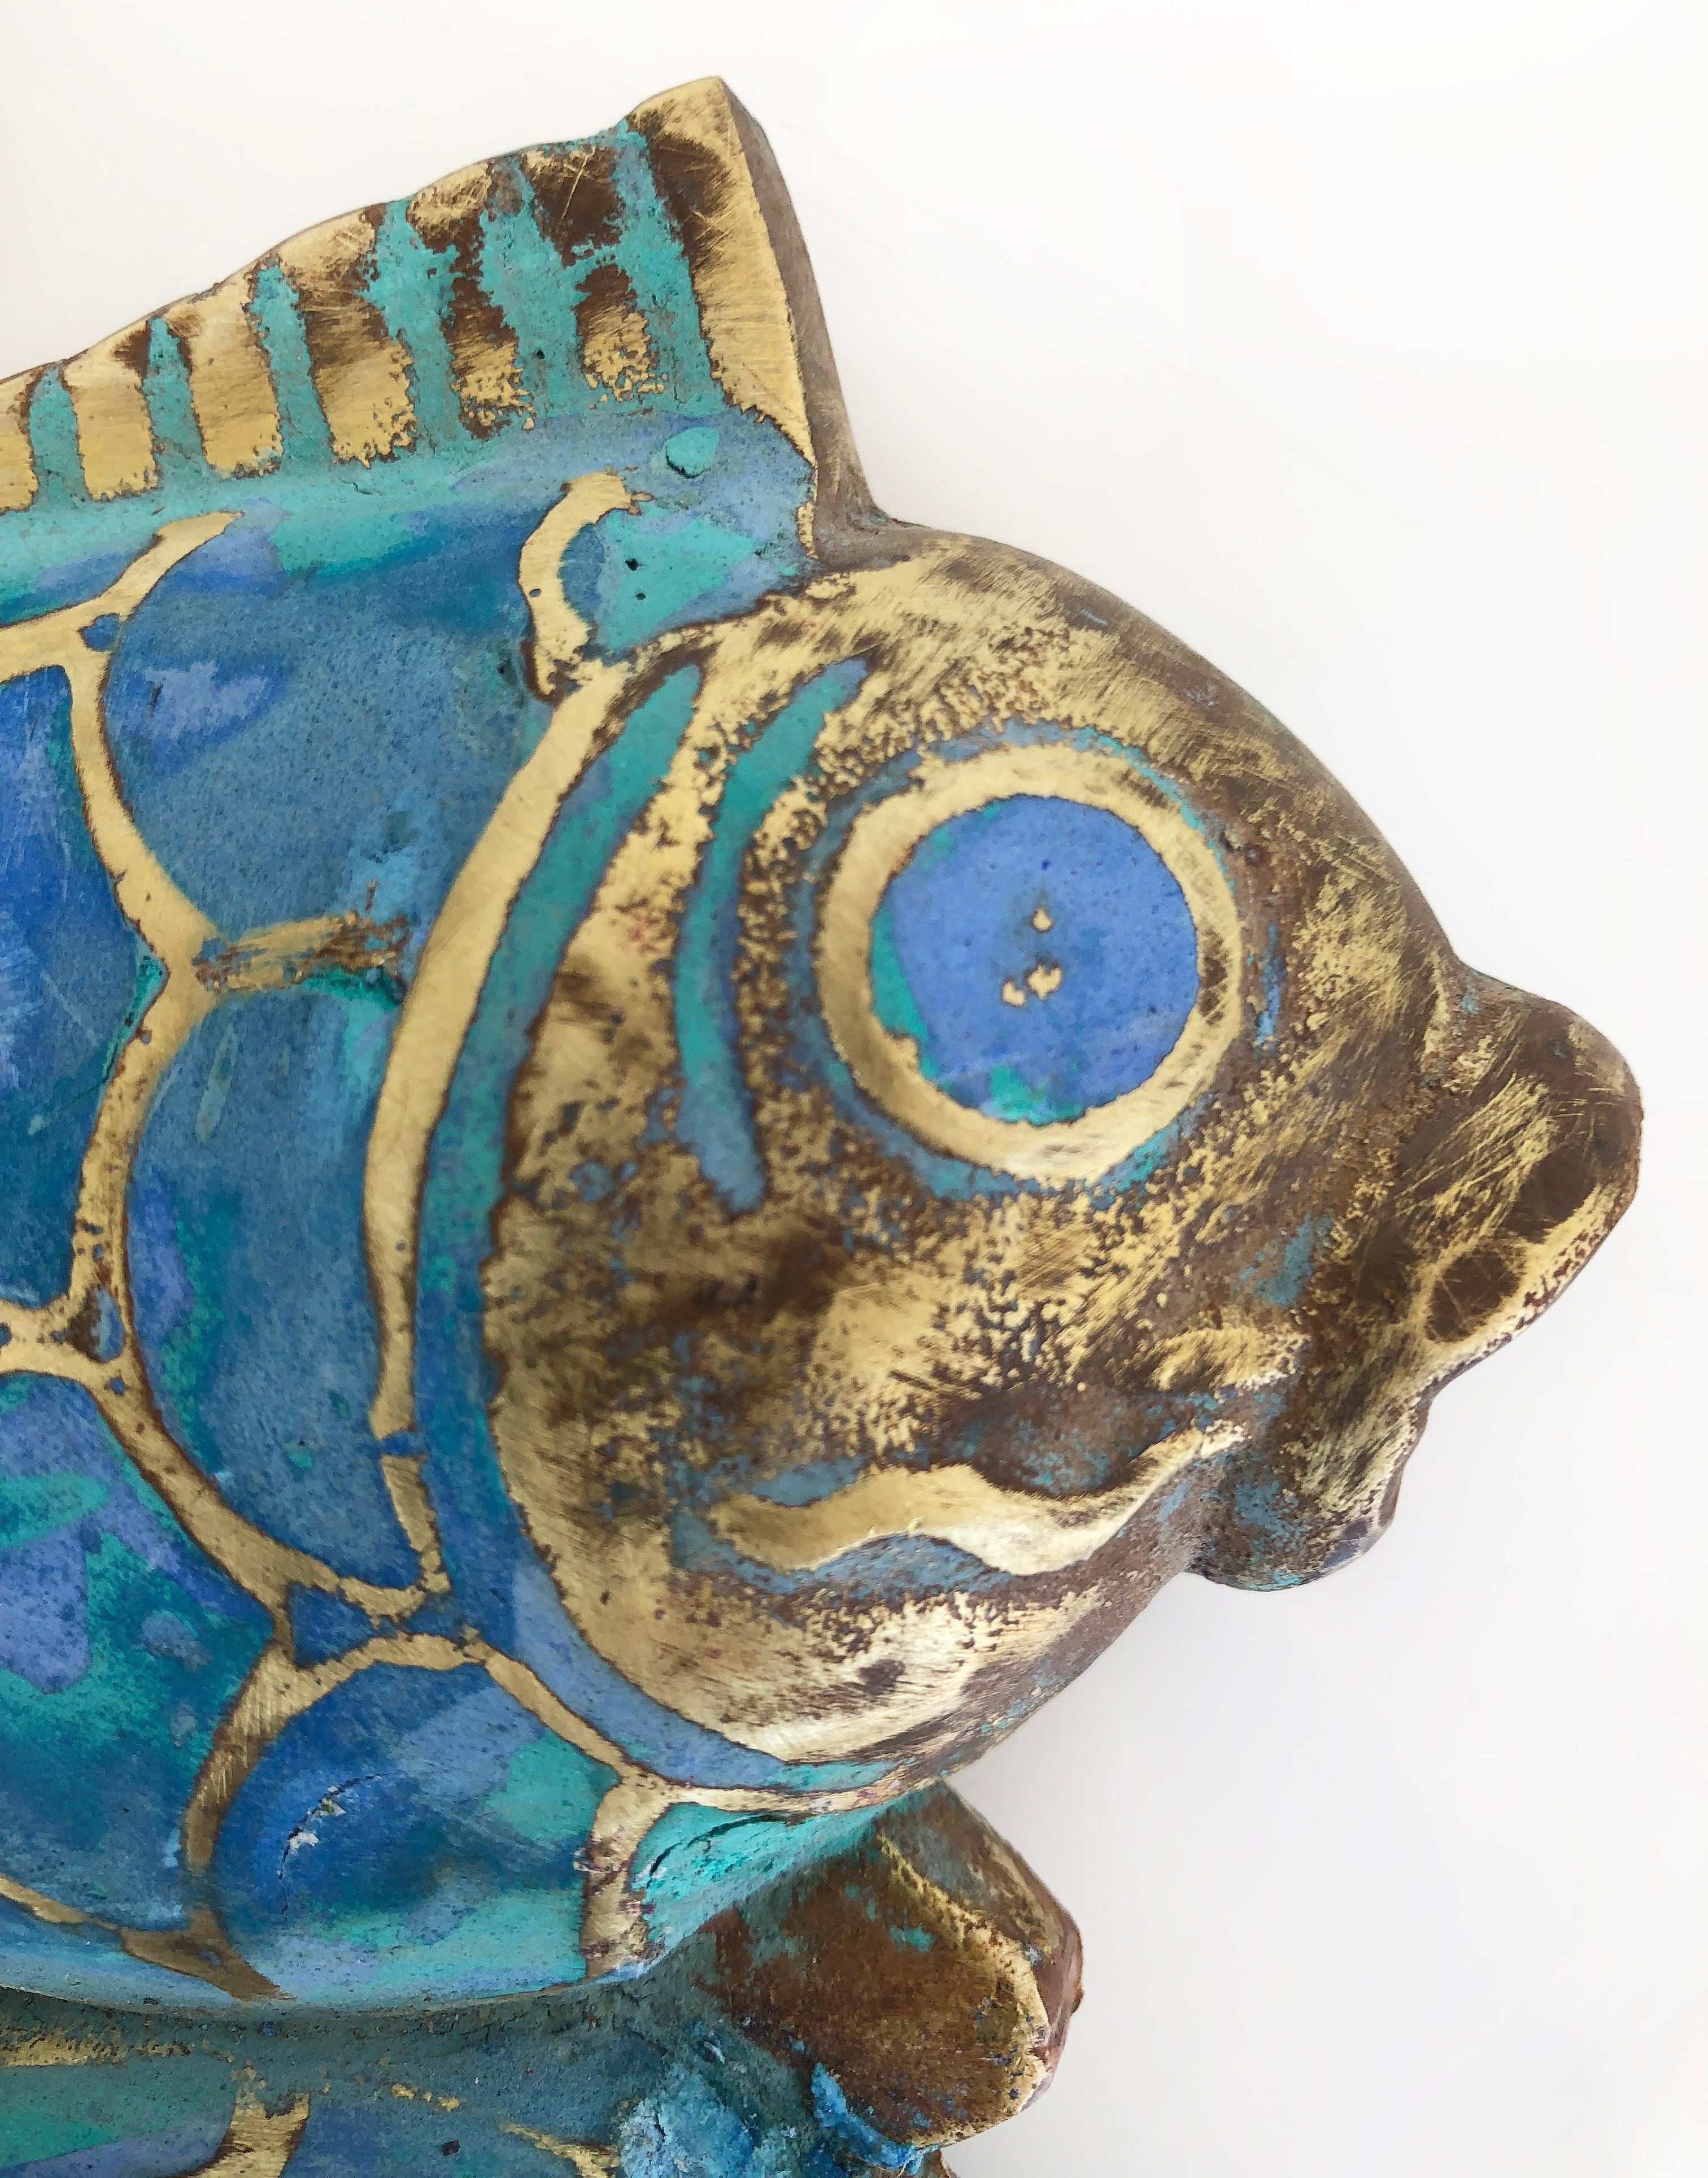 Pepe Mendoza mid-century brass turquoise fish handles, pair

Offered for sale is a large pair of Mid-Century Modern door handles by Pepe Mendoza from Mexico. The handles are turquoise and brass pairs of fish and each retains the original Pepe